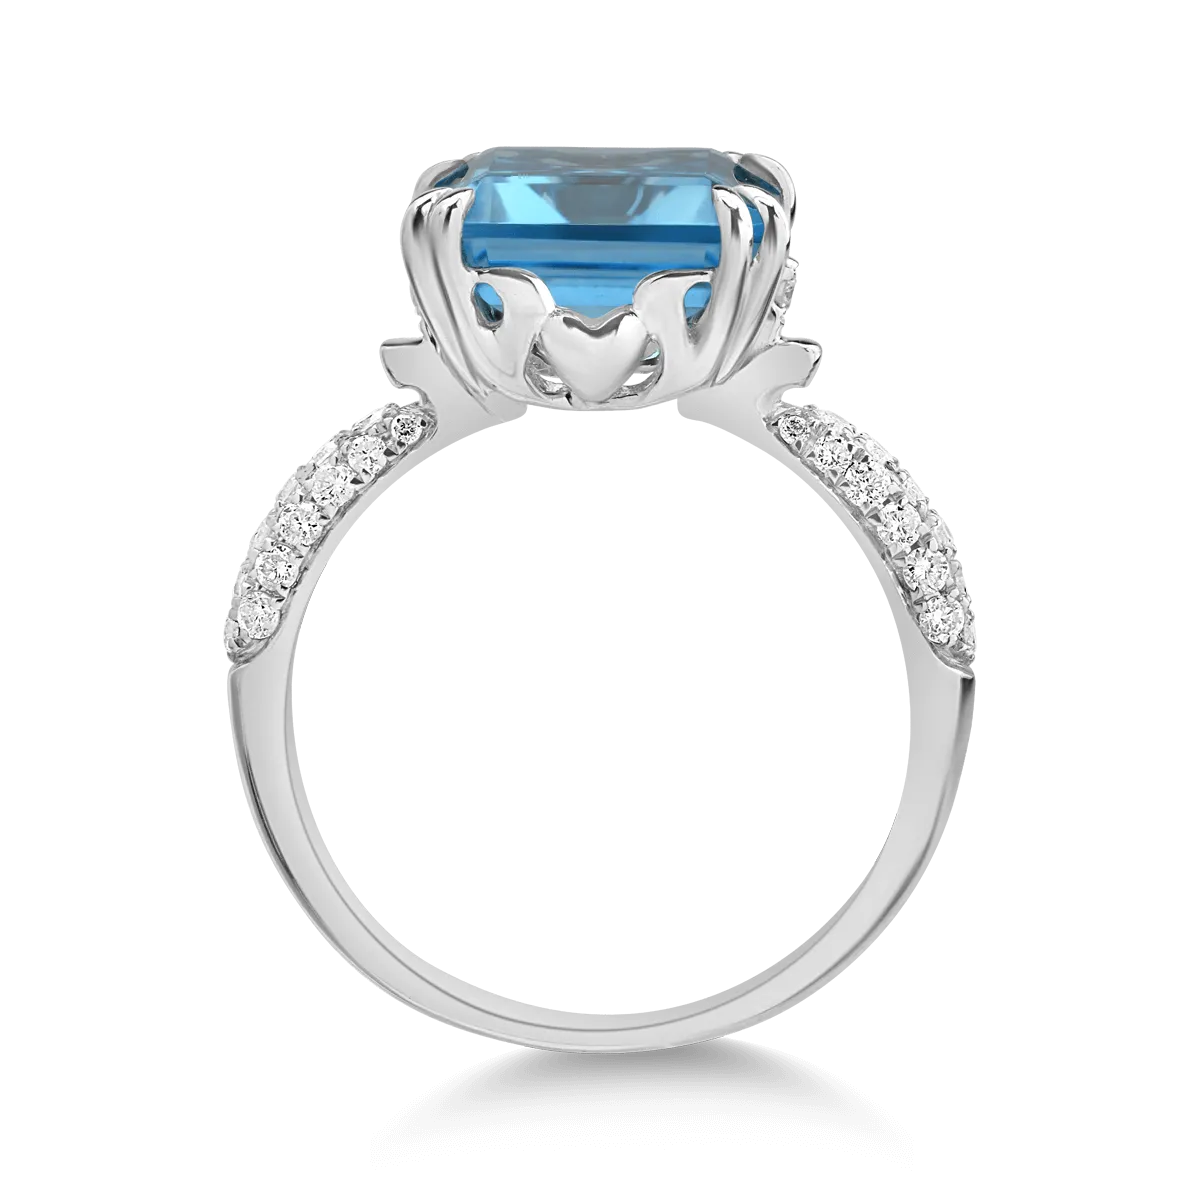 14K white gold ring with 6.496ct blue topaz and 0.326ct diamonds